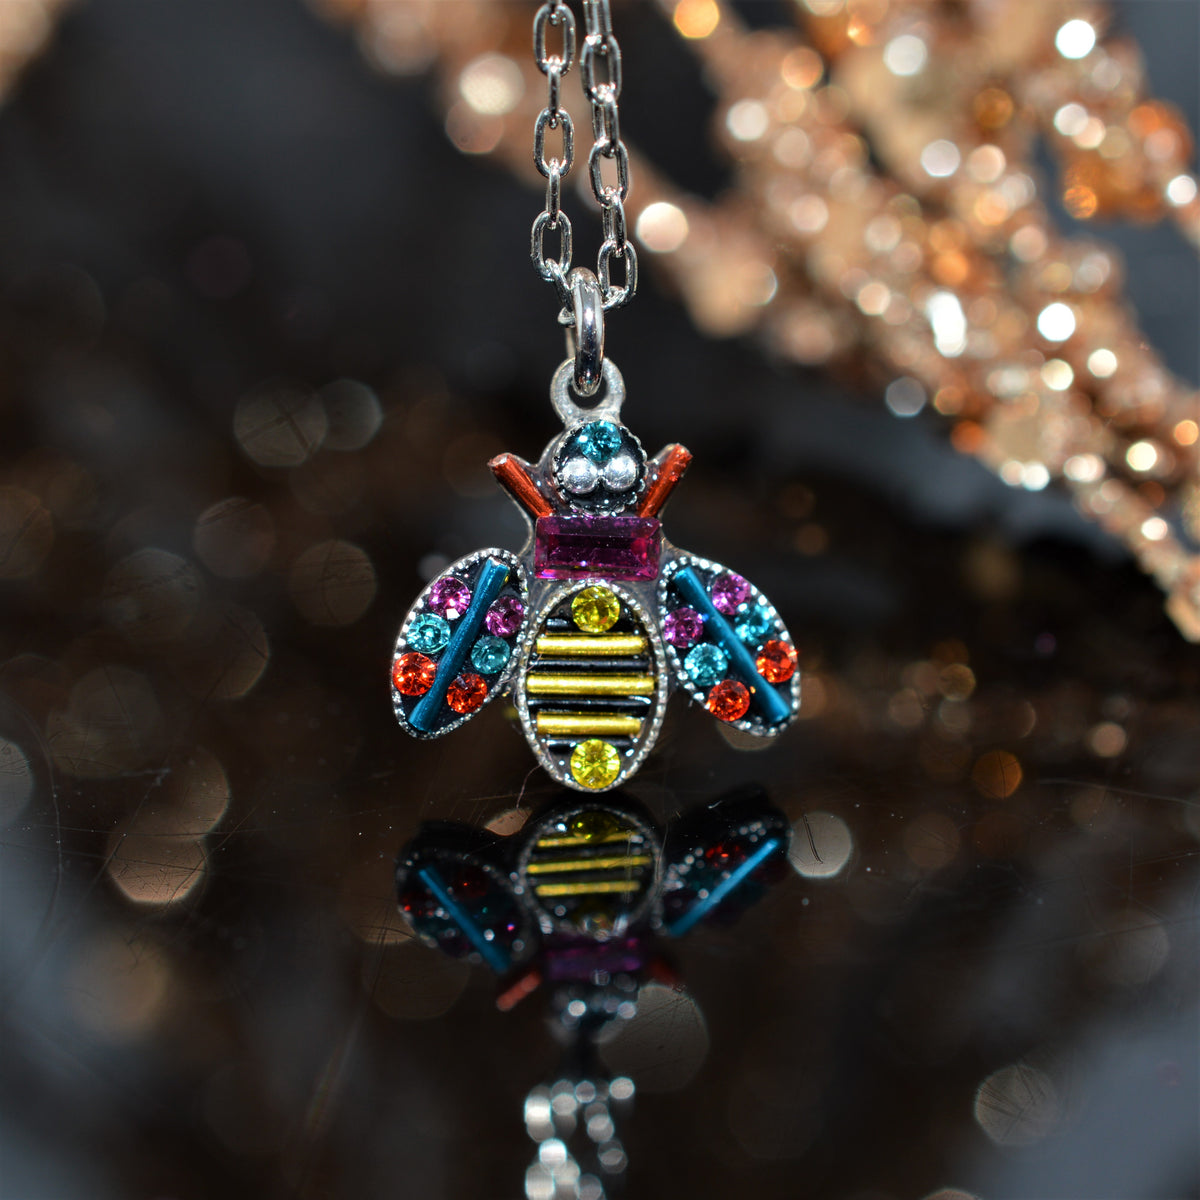 Antique Silver Plated Queen Bee Pendant With Multicolor Colored Crystals by Firefly